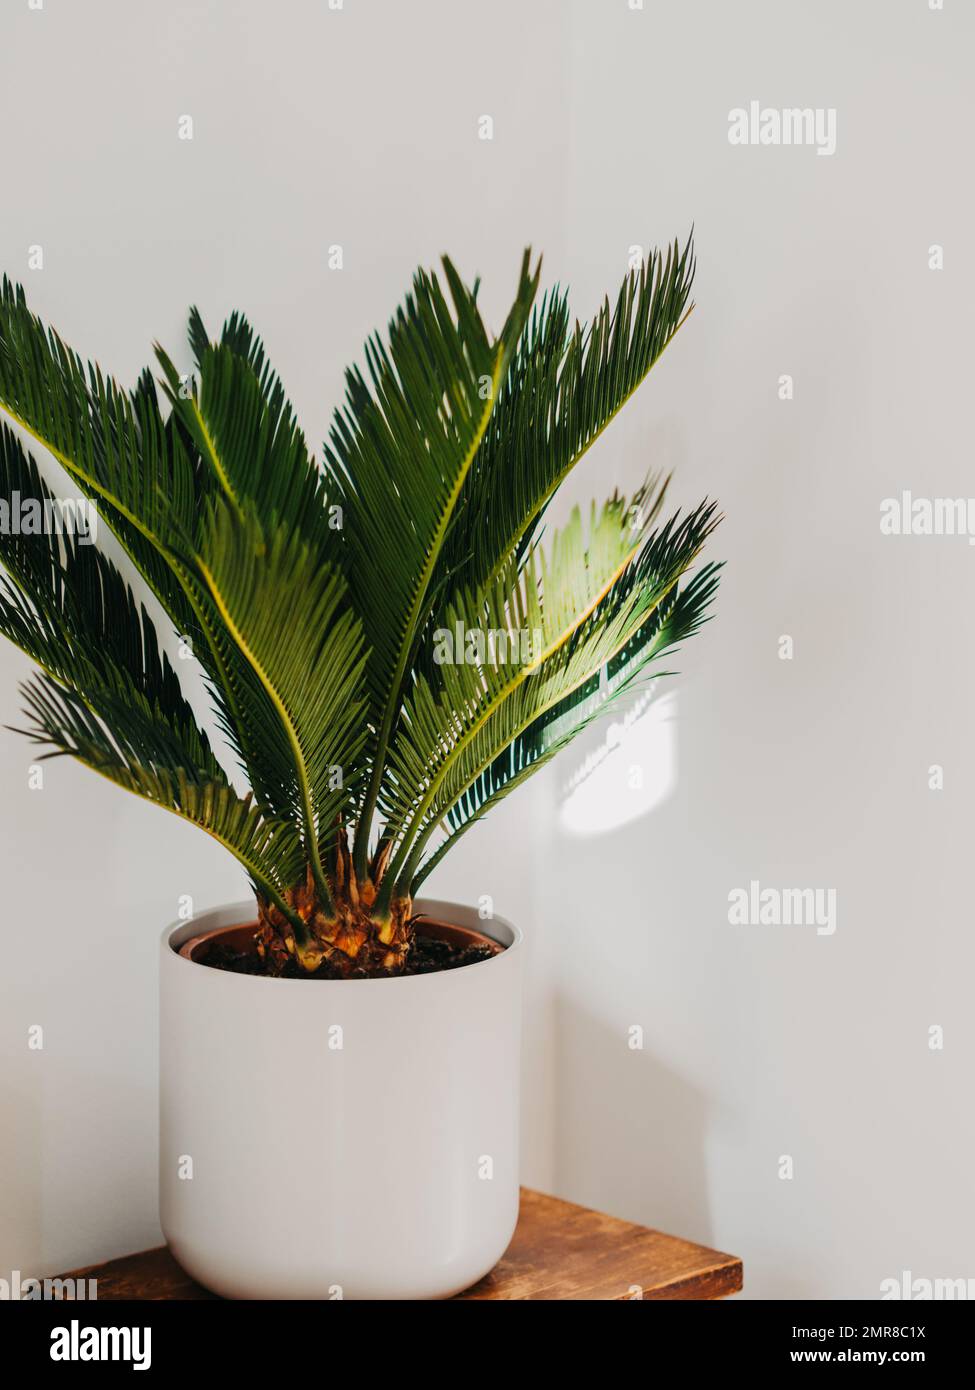 Cycas revoluta houseplant in white ceramic pot on wood stool in front of white wall. selective focus. Copy space Stock Photo